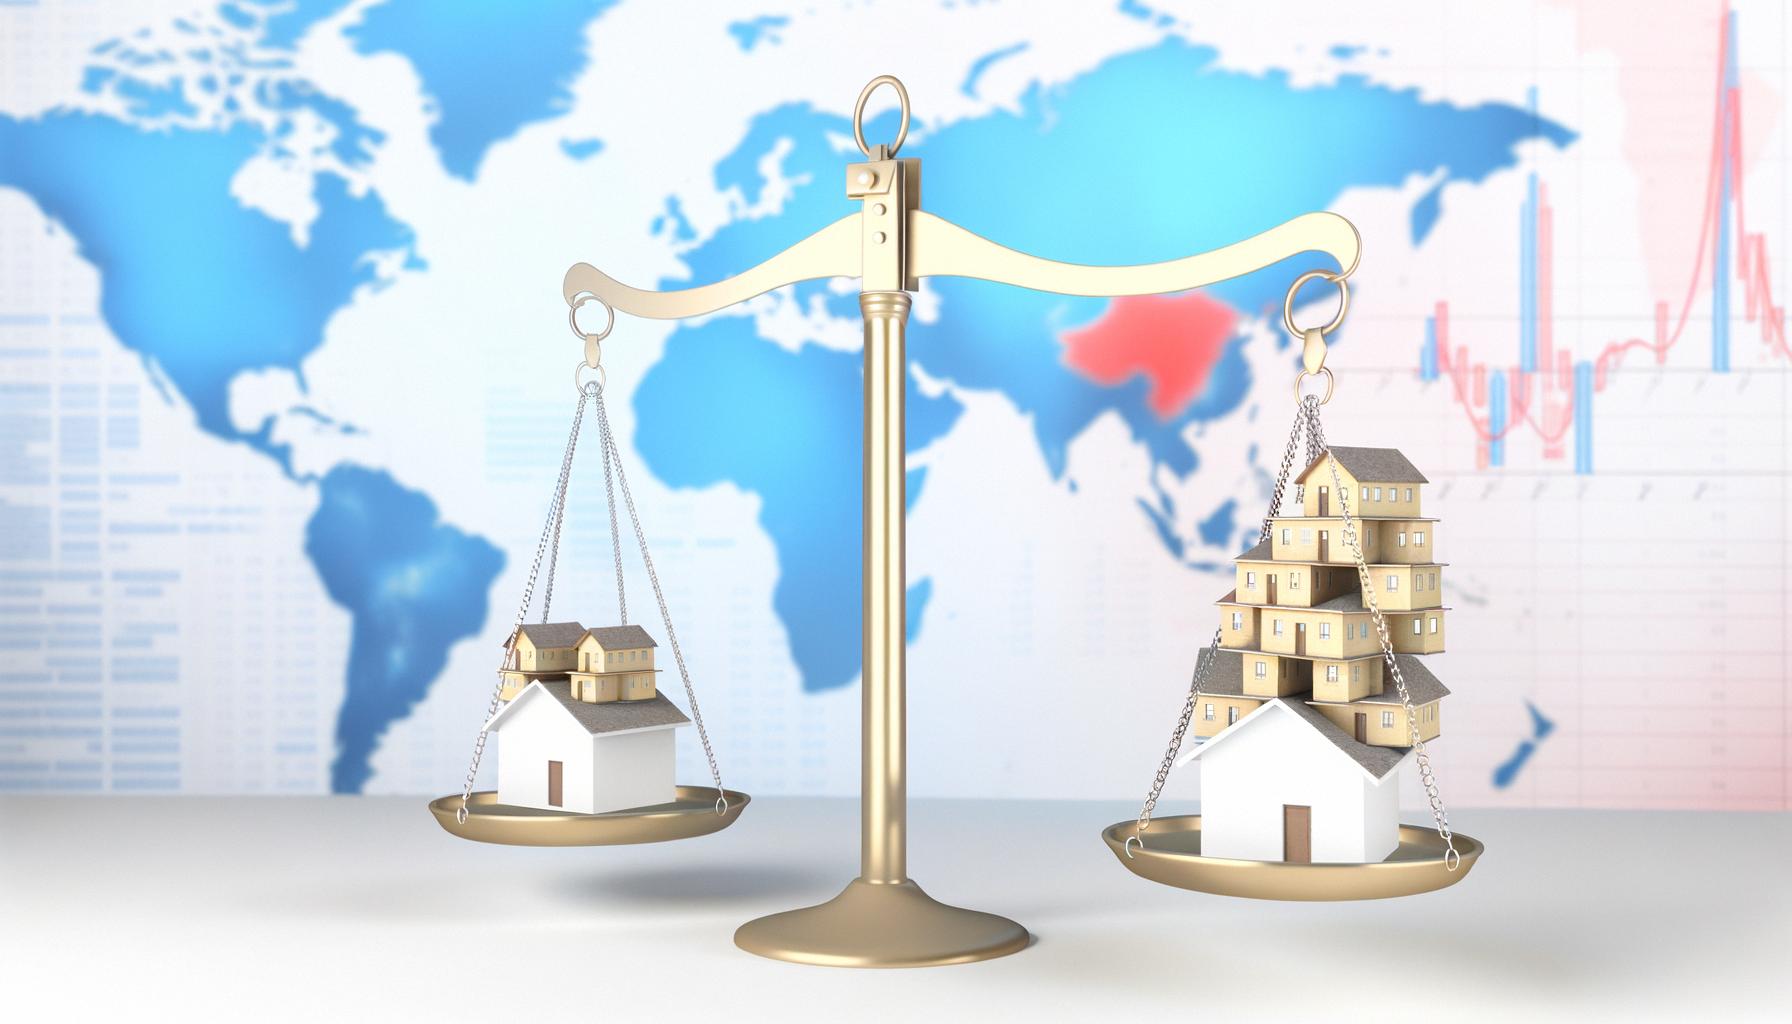 Global policy reforms addressing housing affordability crisis.